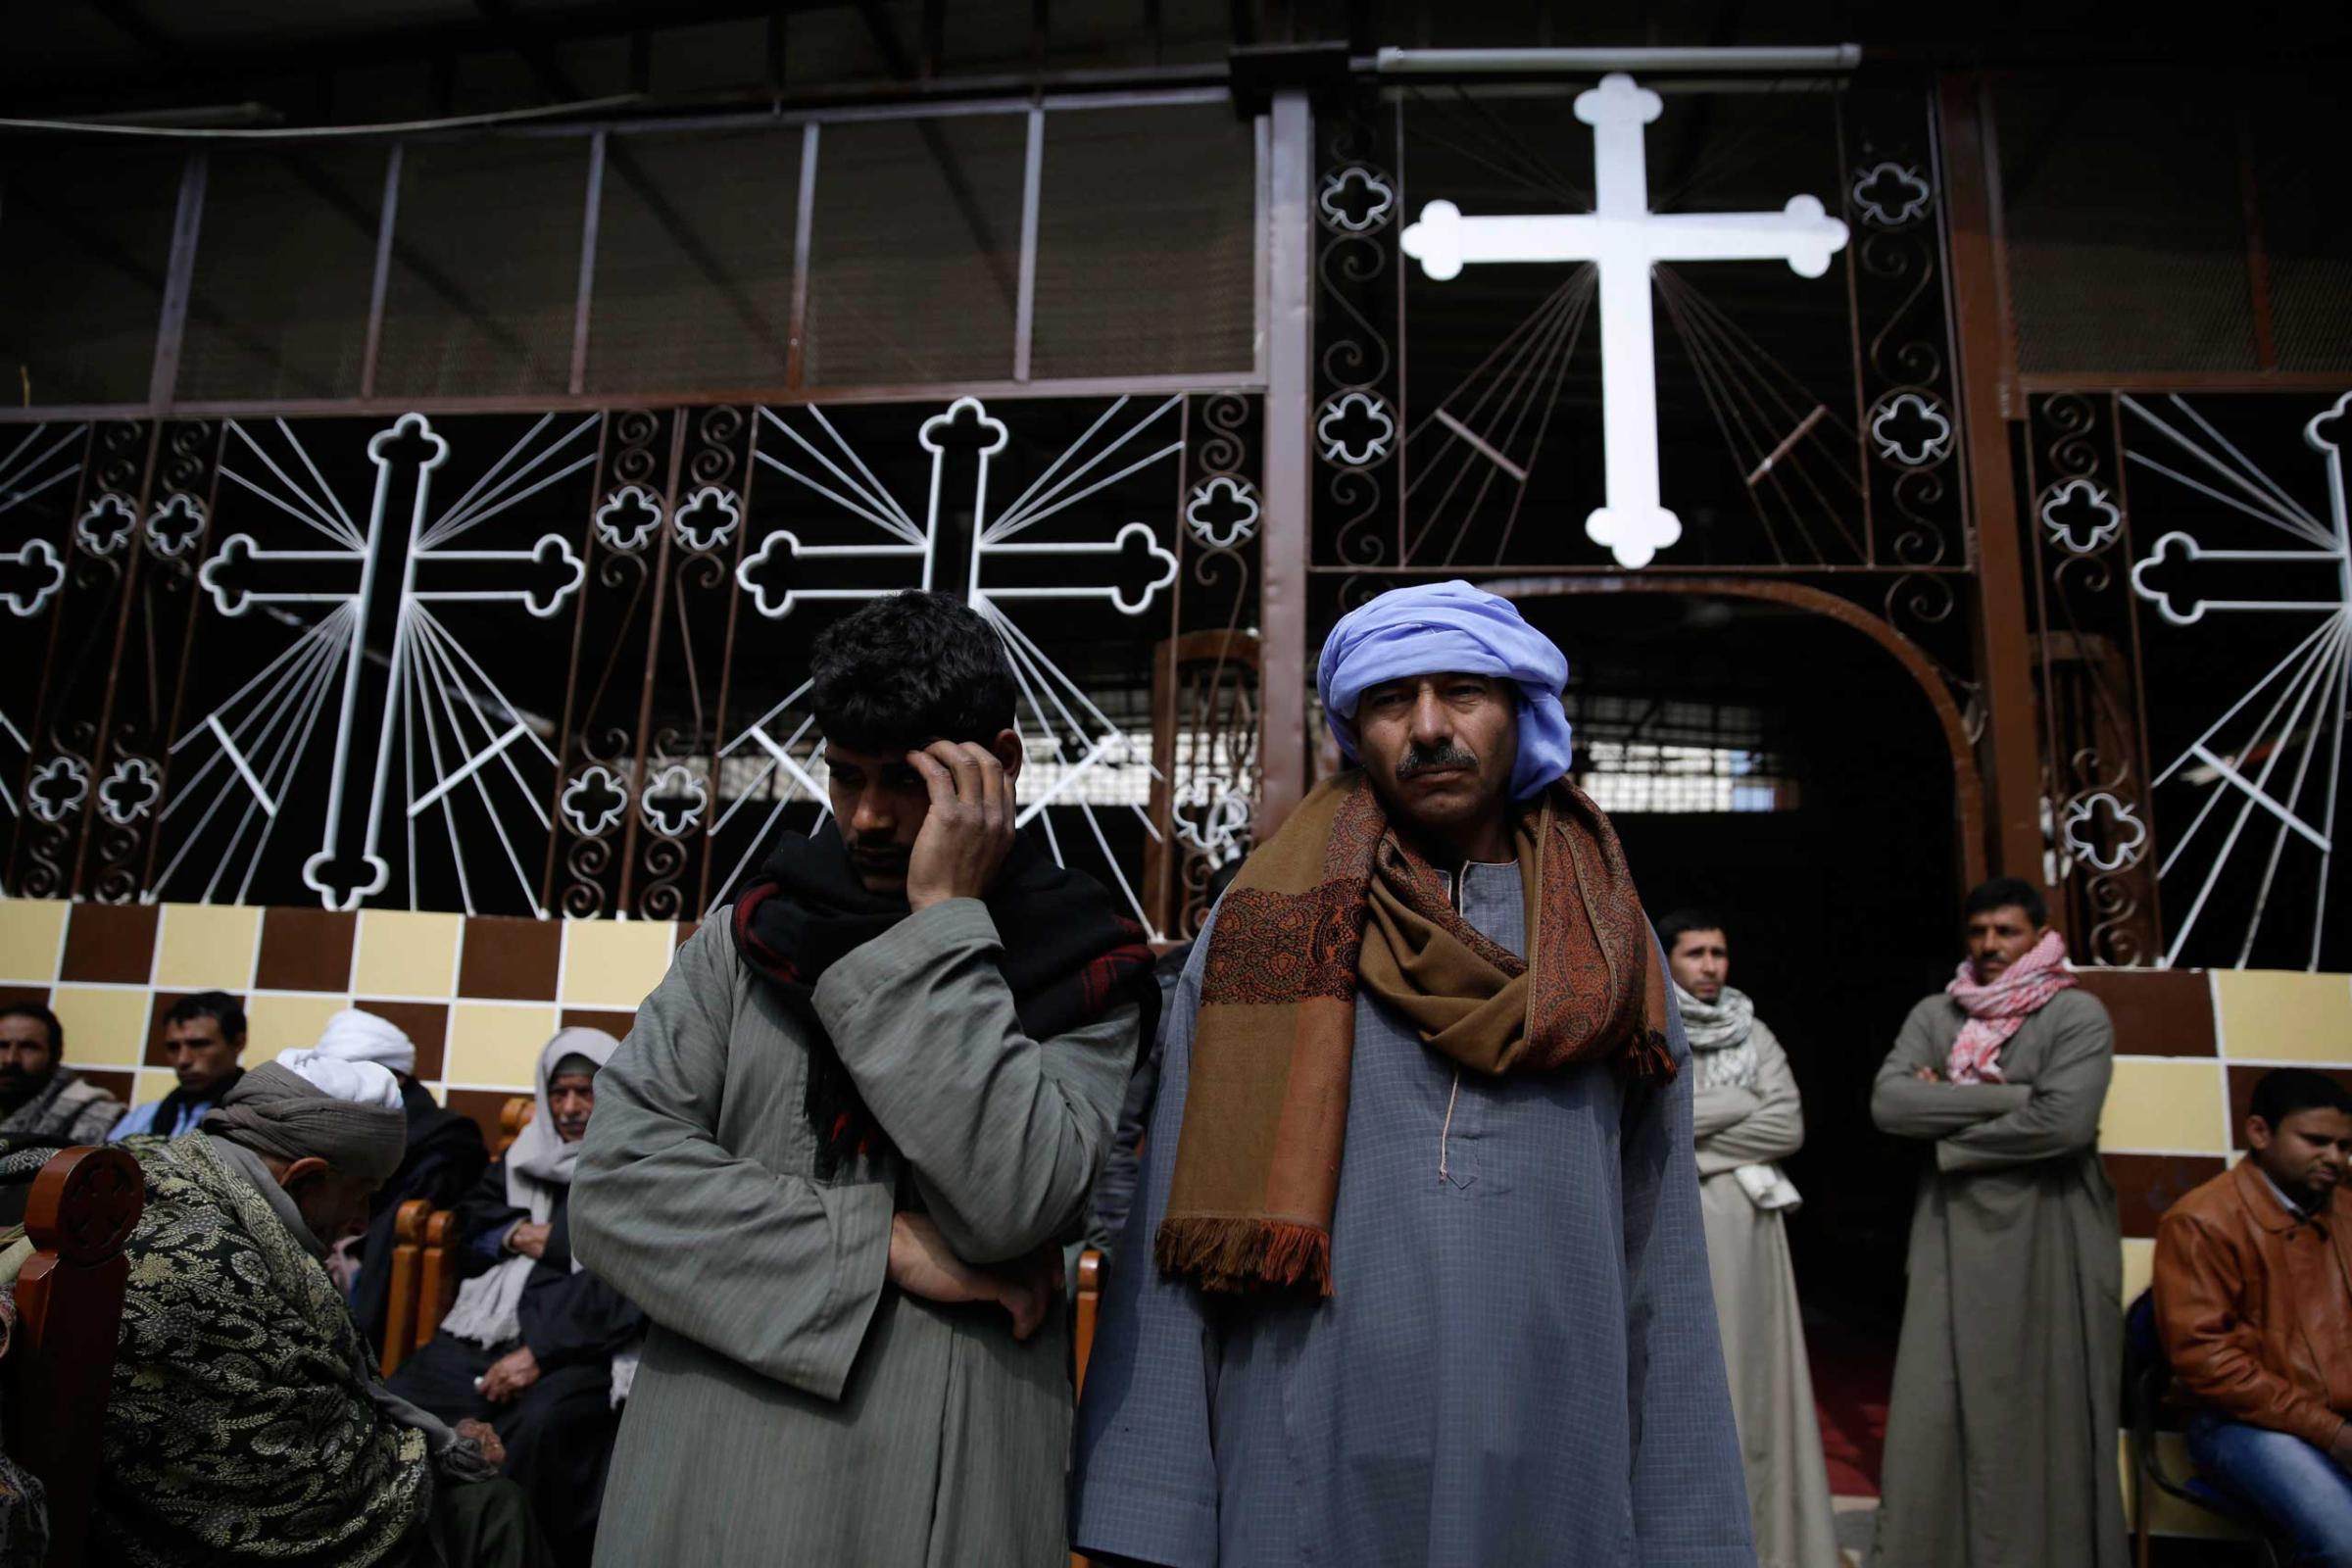 Men mourn over the Egyptian Coptic Christians who were captured in Libya and killed by militants affiliated with the Islamic State group, at the Virgin Mary church in the village of el-Aour, near Minya, 135 miles south of Cairo, Feb. 16, 2015.